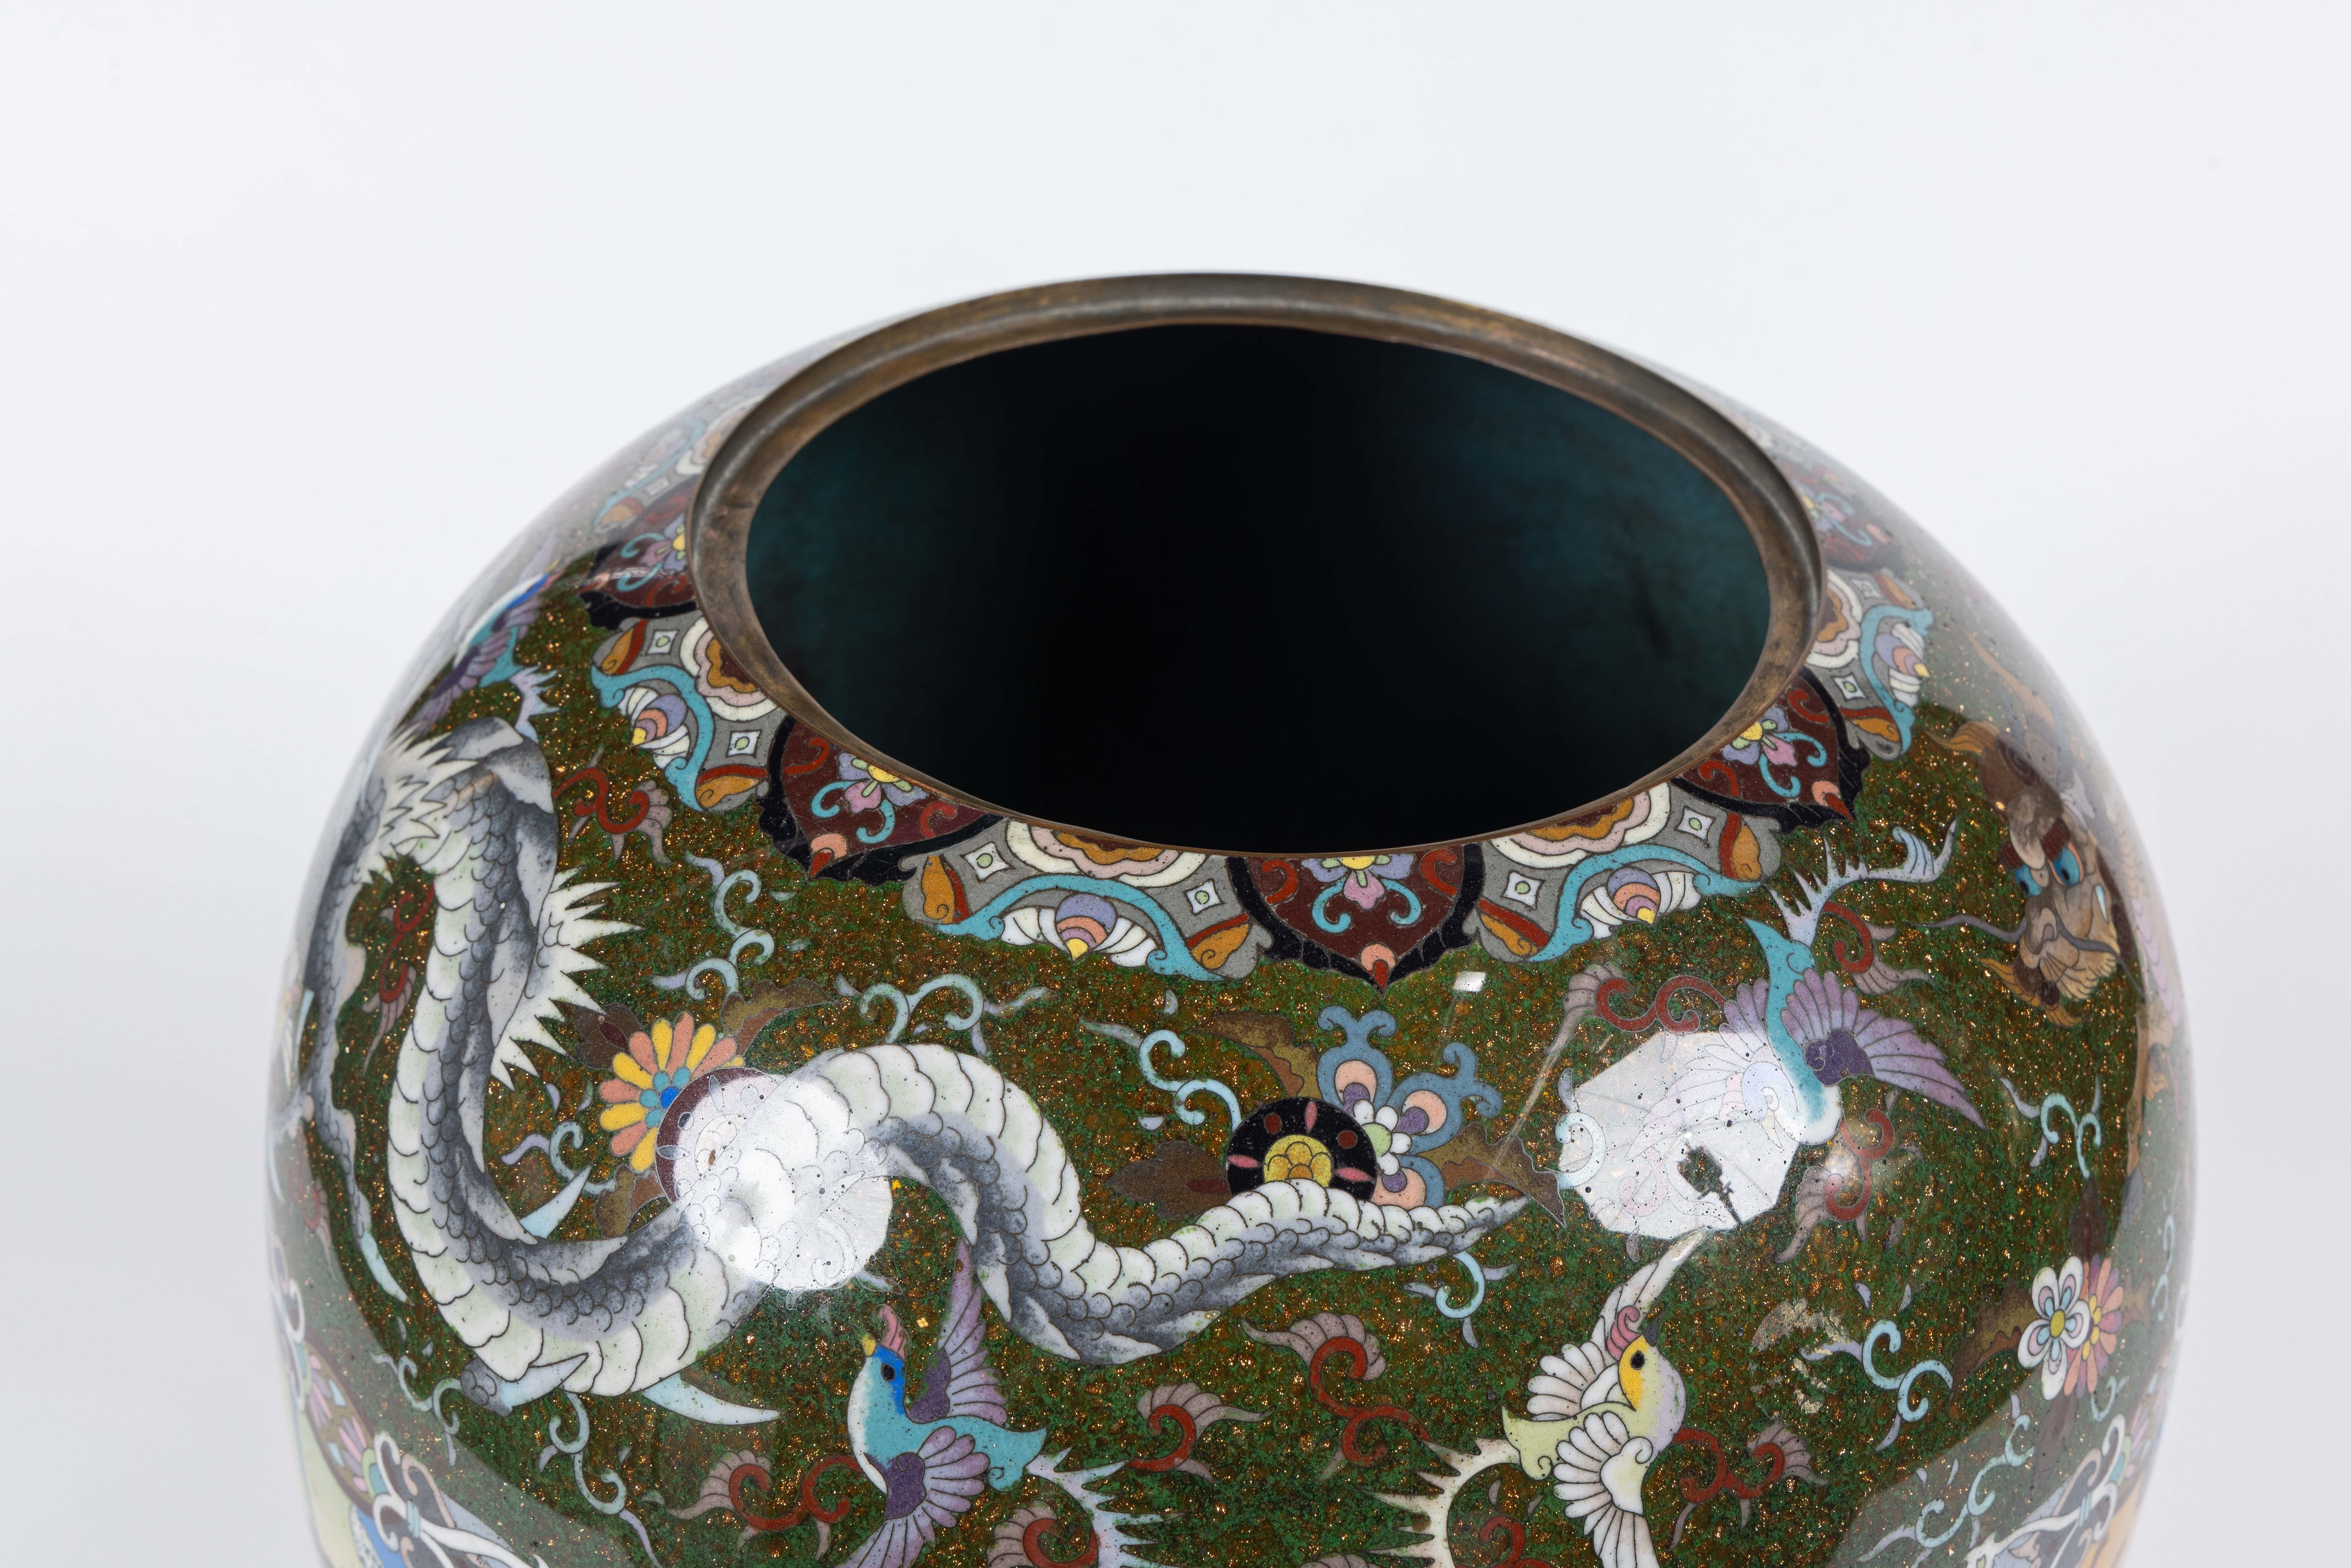 Majestic Japanese Cloisonne Enamel Covered Jar with Dragons, Theater Characters  For Sale 13